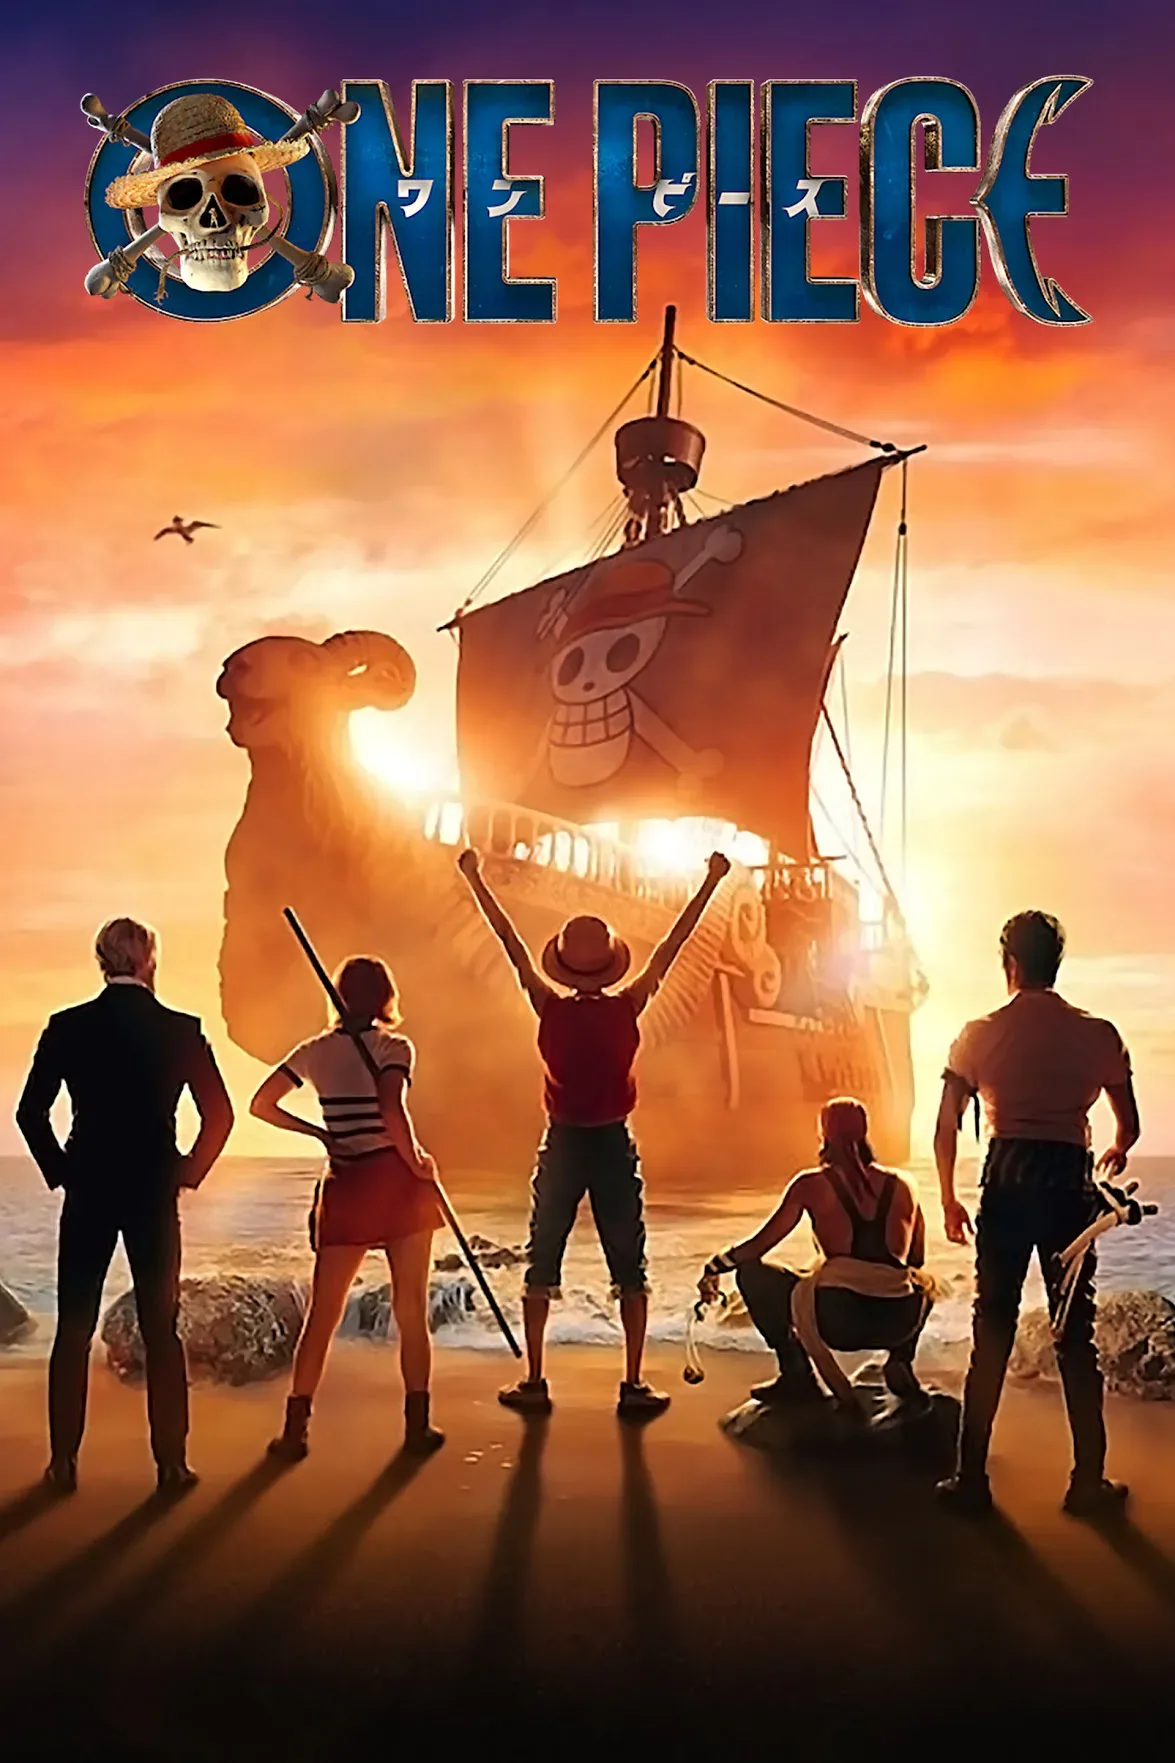 In the series, One Piece Season 1 - Monkey D. Luffy and his pirate crew explore a fantastical world of endless oceans and exotic islands in search of the world's ultimate treasure to become the next Pirate King.